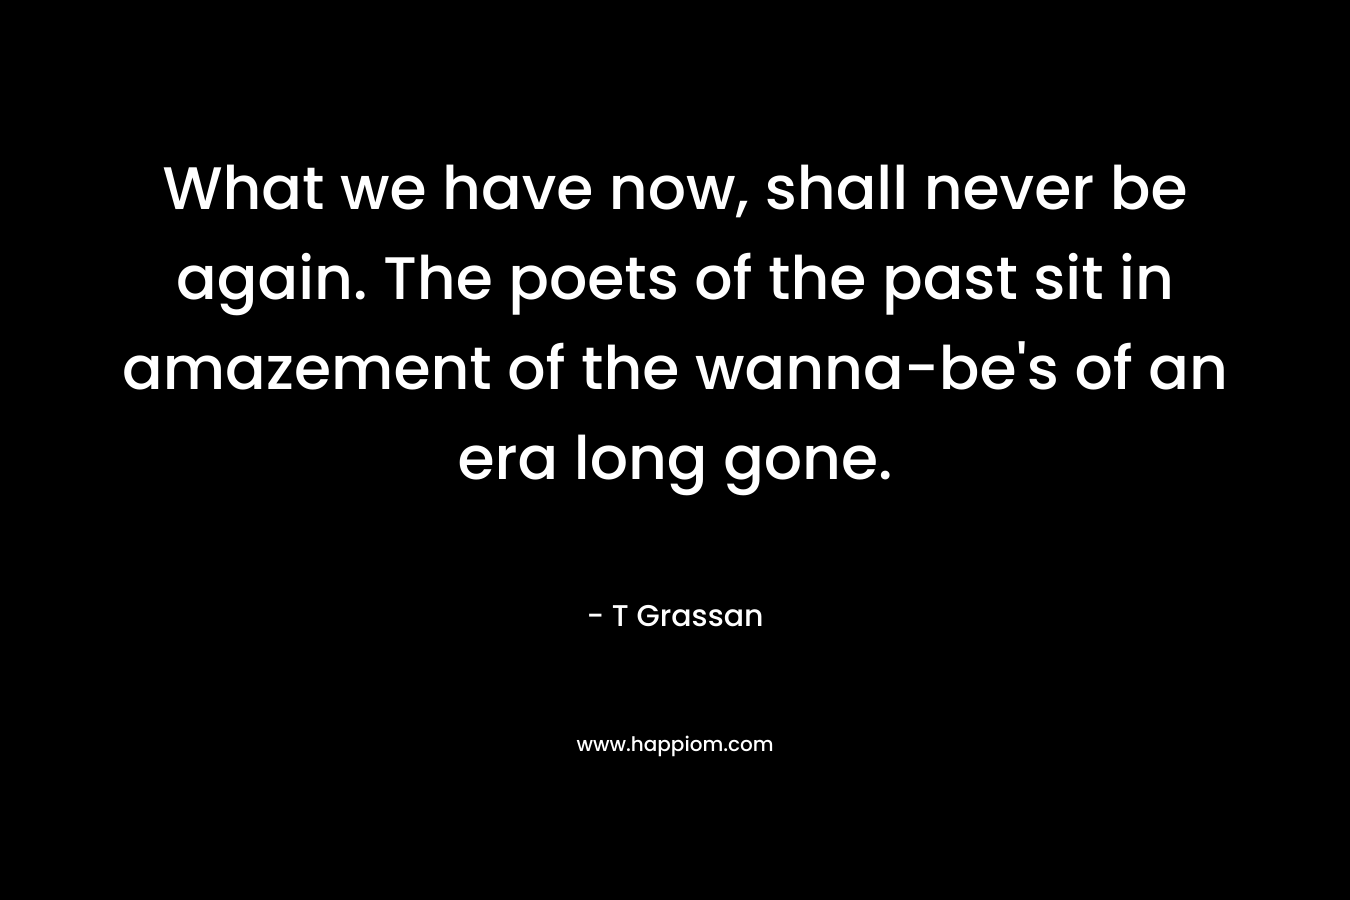 What we have now, shall never be again. The poets of the past sit in amazement of the wanna-be’s of an era long gone. – T Grassan